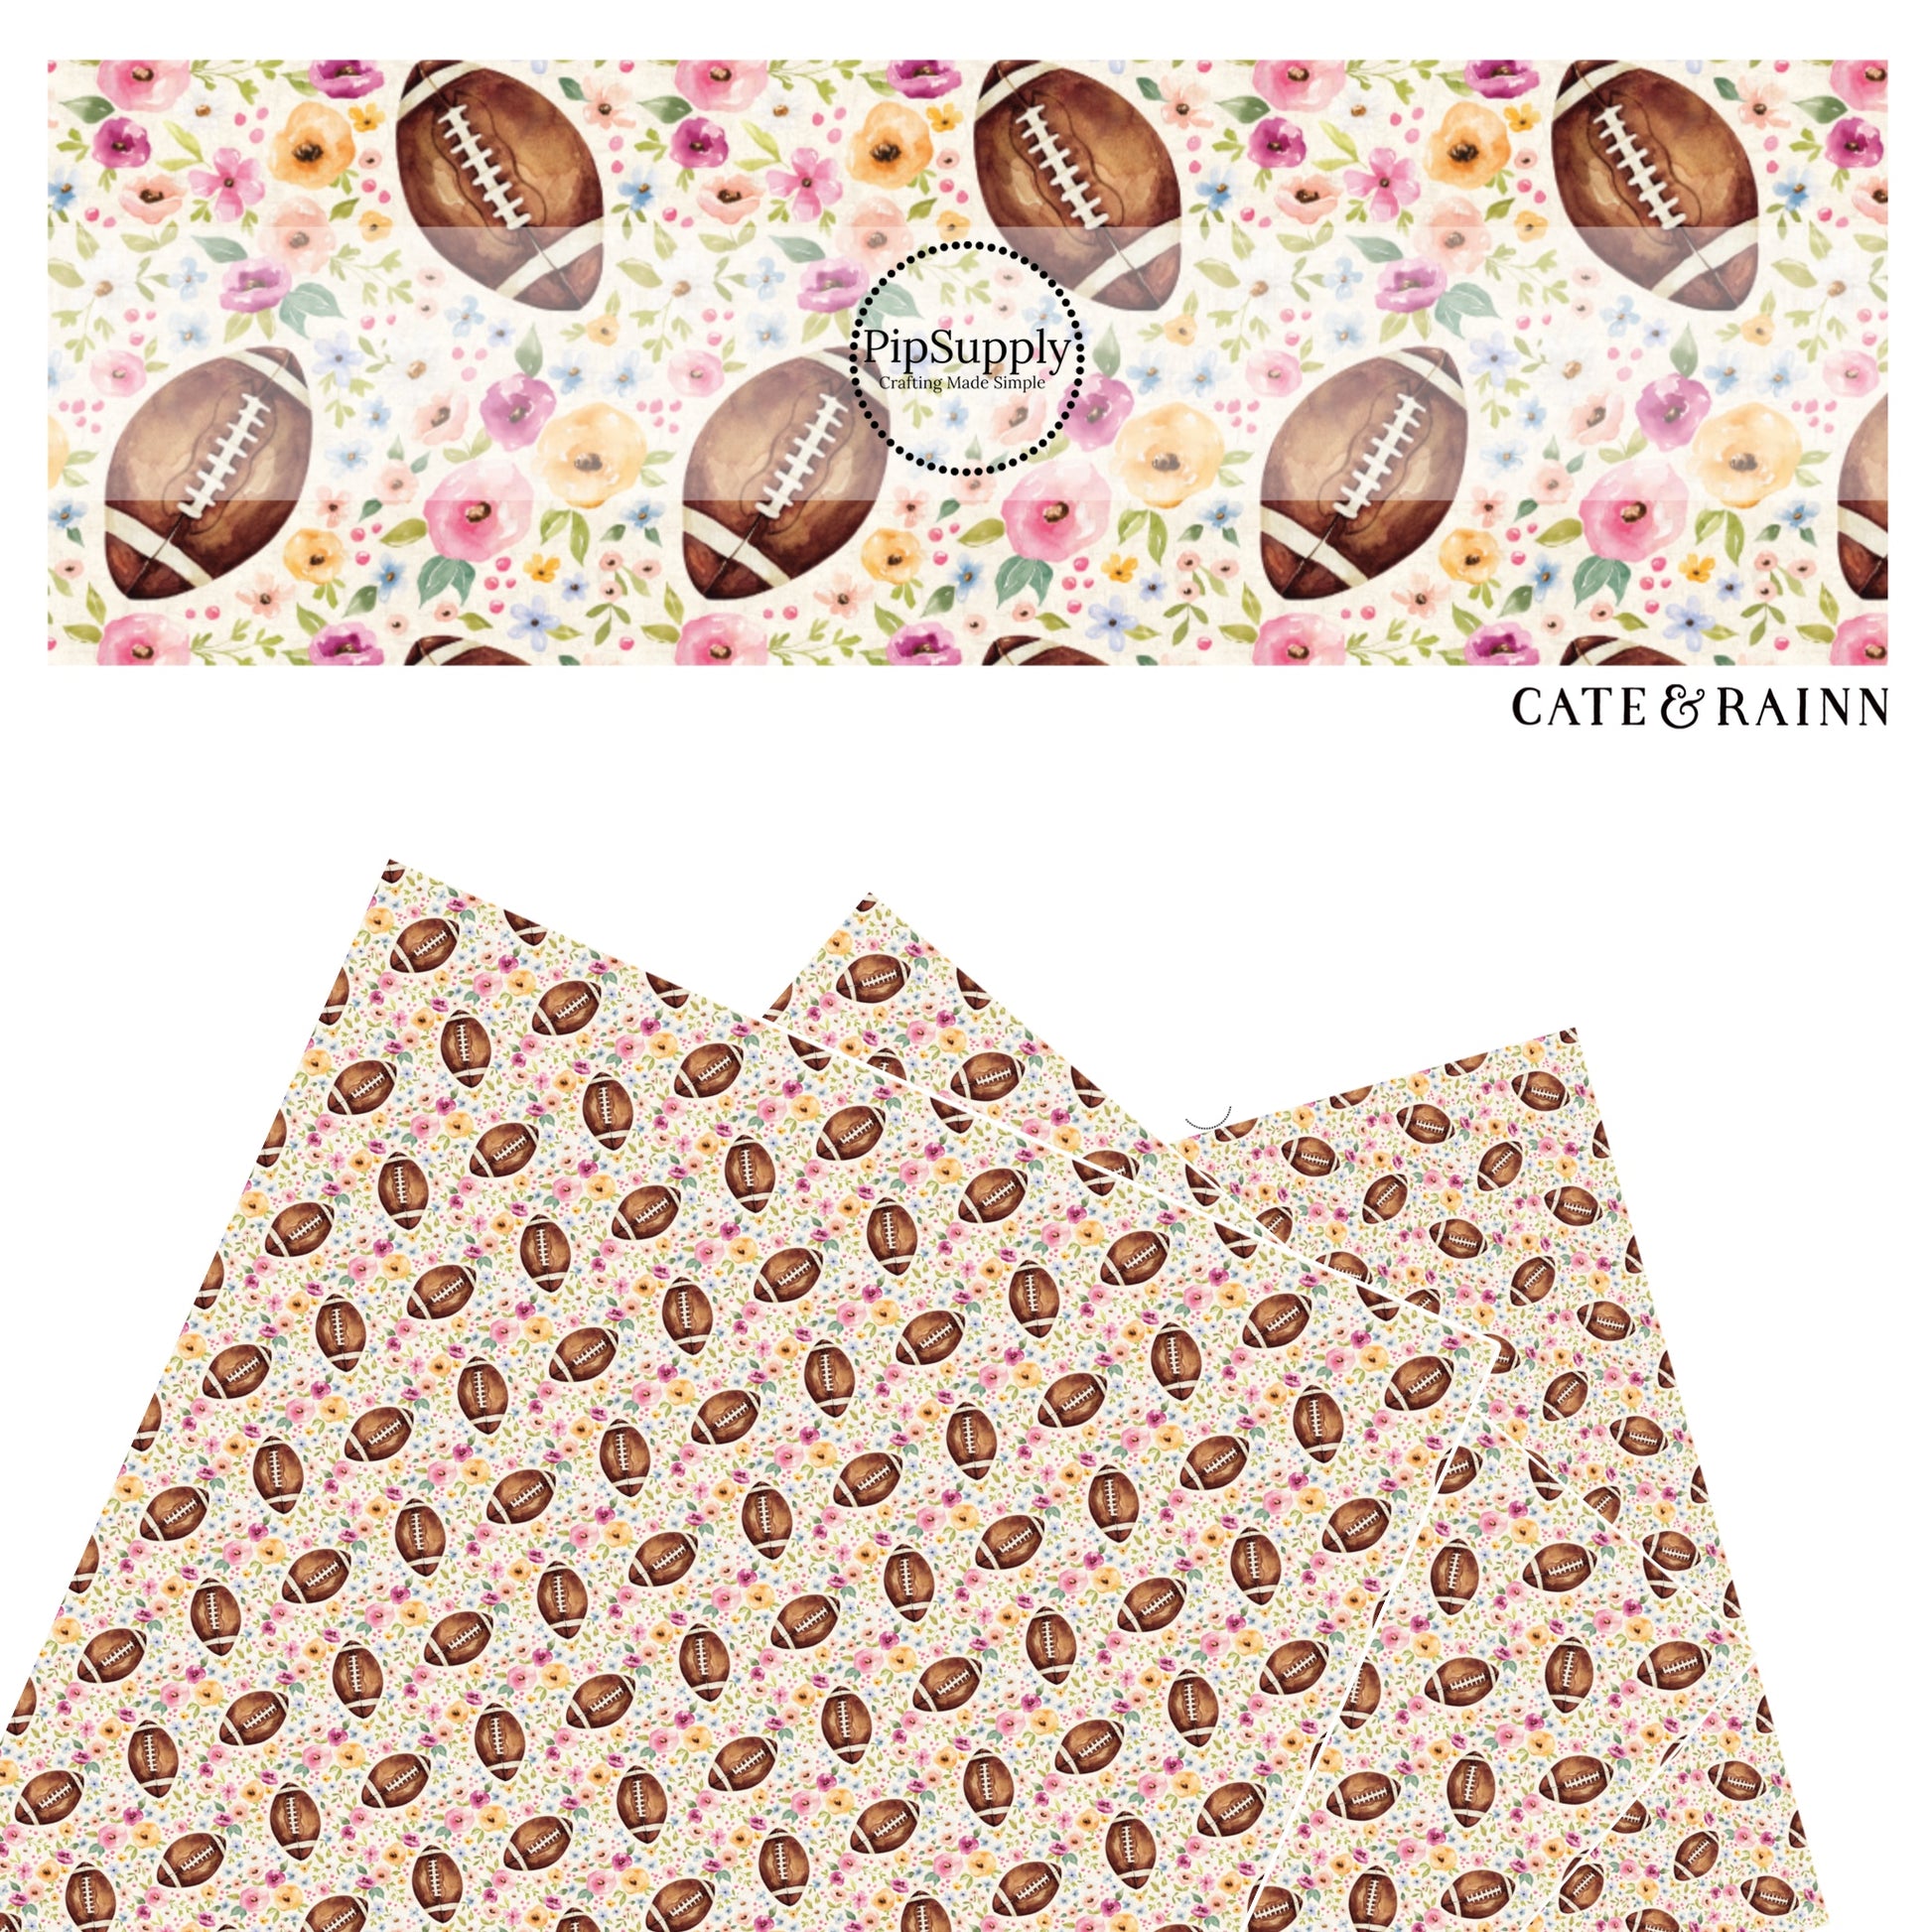 These spring floral sport pattern themed faux leather sheets contain the following design elements: footballs surrounded by flowers on cream. Our CPSIA compliant faux leather sheets or rolls can be used for all types of crafting projects.